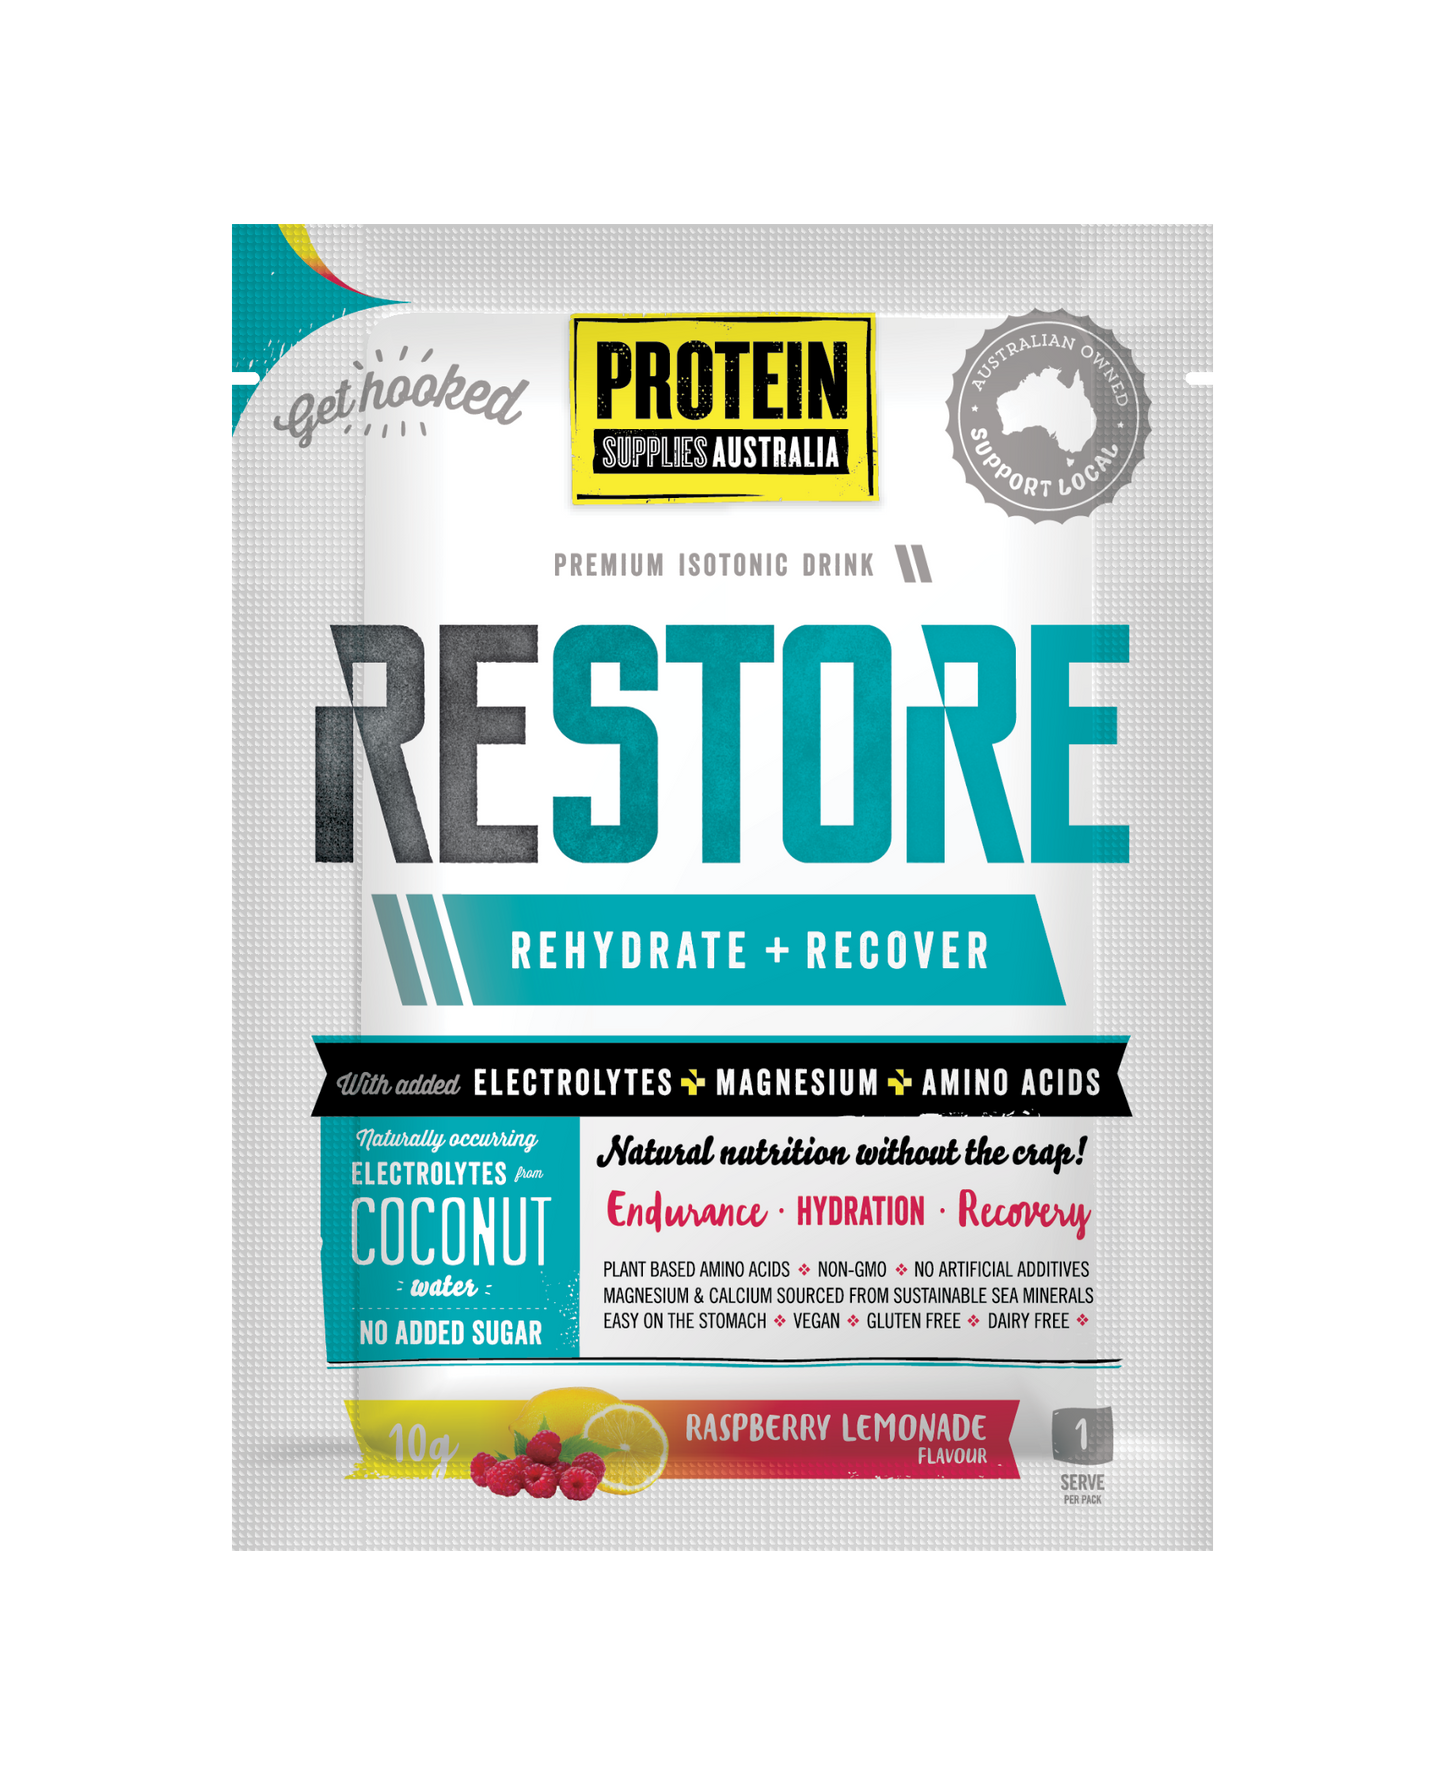 Protein Supplies Australia Restore Hydration Recovery Drink 10g Or 200g, Raspberry Lemonade Flavour